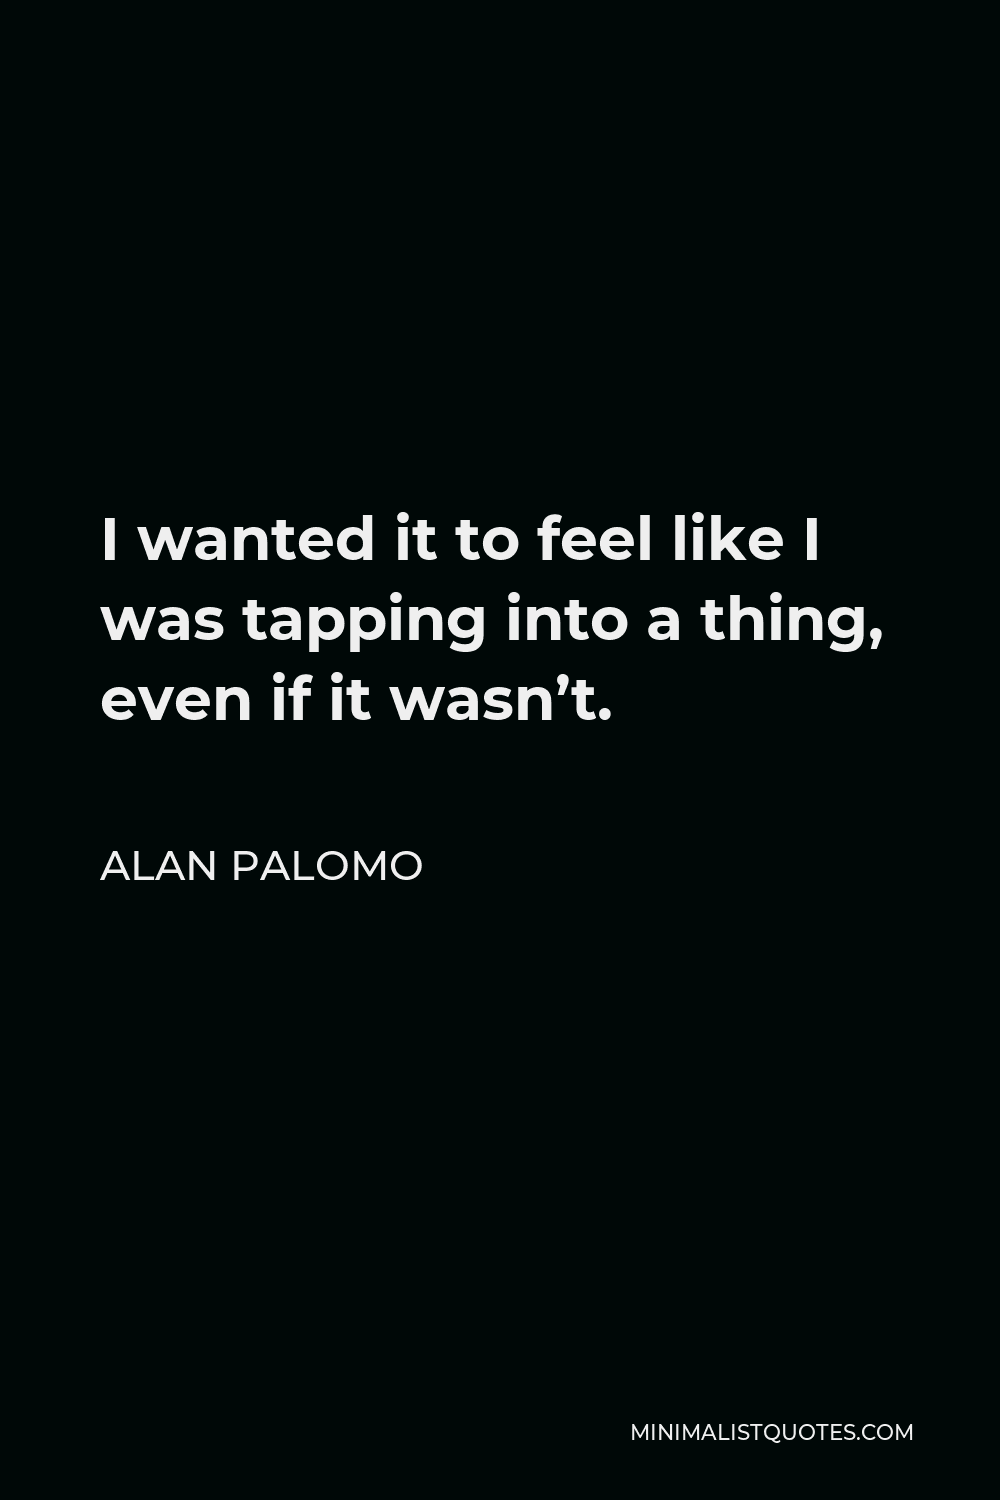 Alan Palomo Quote - I wanted it to feel like I was tapping into a thing, even if it wasn’t.